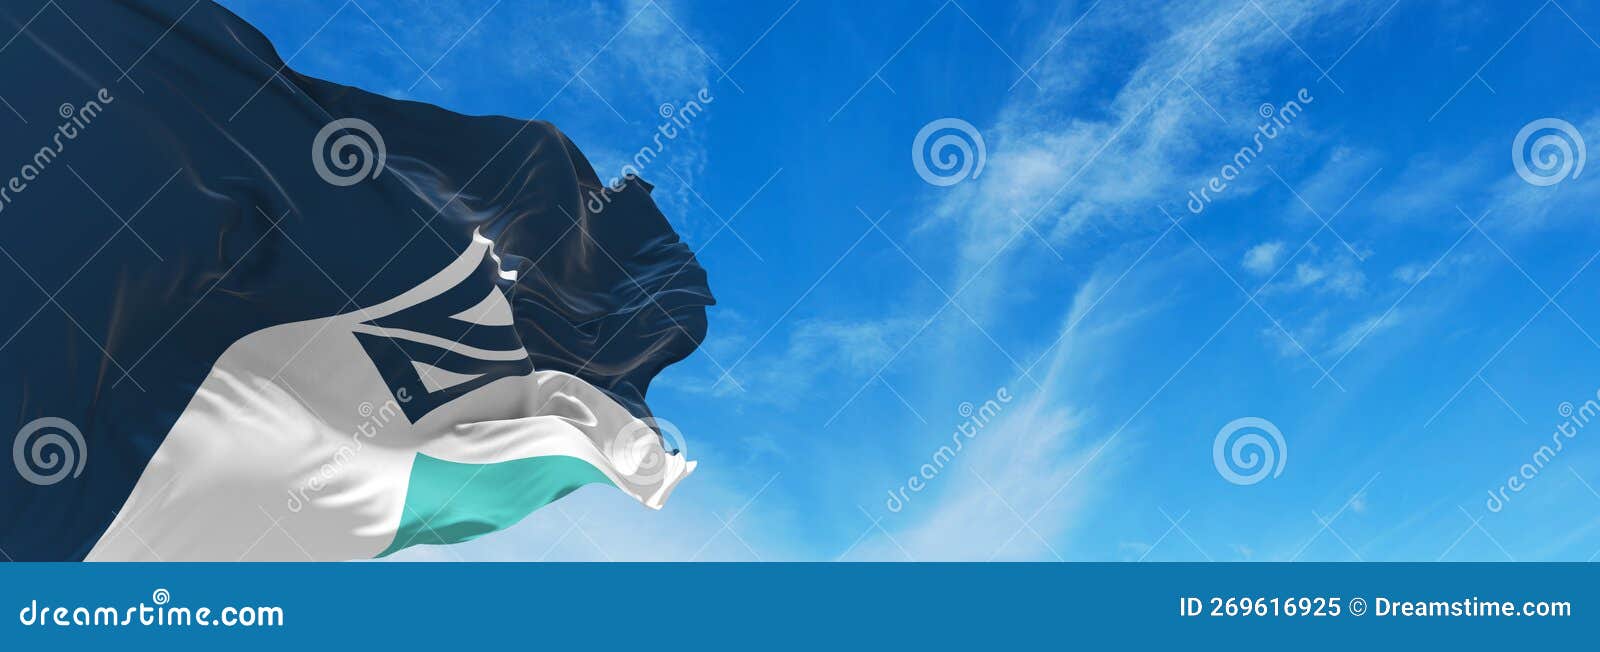 Official Flag of Proposed Taiwan the Formosa at Cloudy Sky Background ...